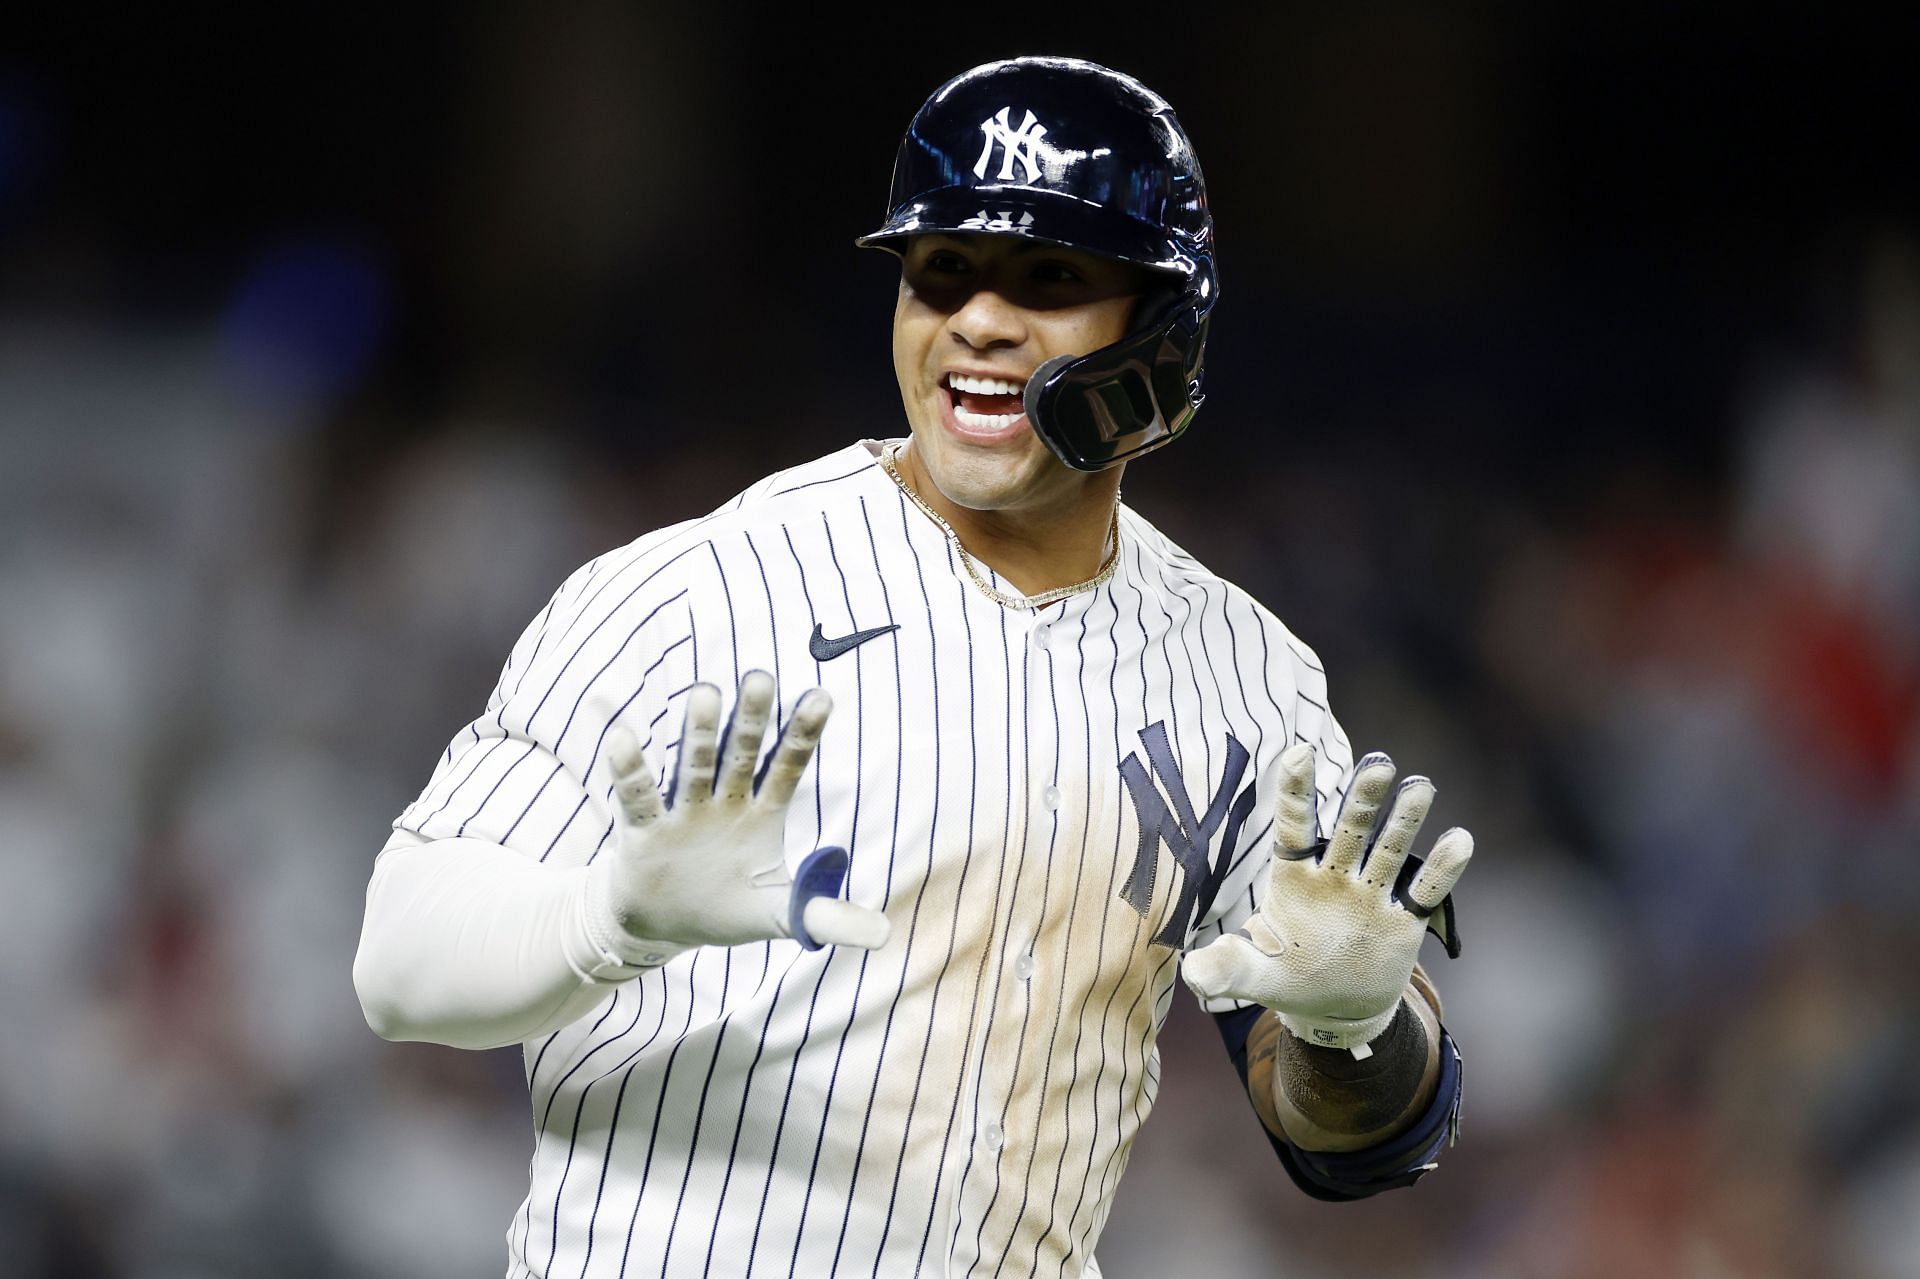 New York Yankees second baseman Gleyber Torres continues to win fans over  after his miraculous start: Man is almost 3x Donaldson's OPS